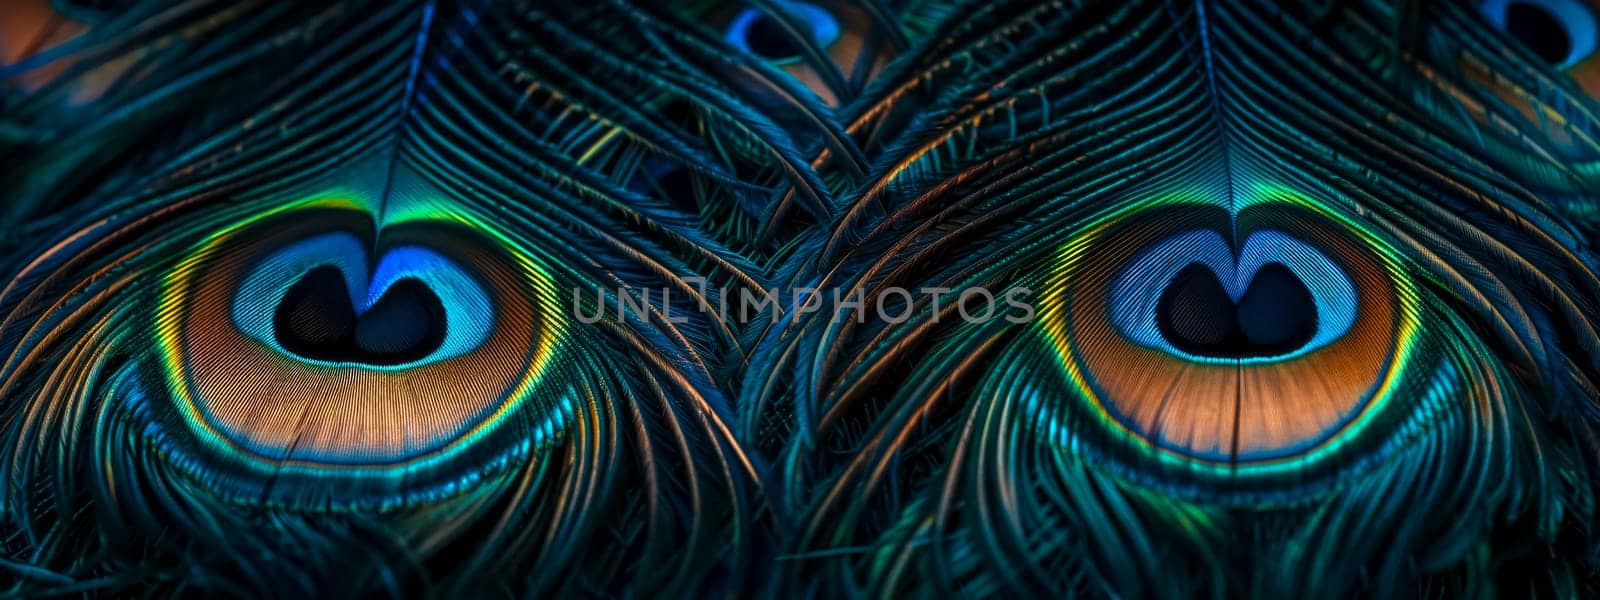 Close-up macro photography of iridescent peacock feathers showcasing vibrant colors and intricate natural patterns with a shimmering, detailed texture